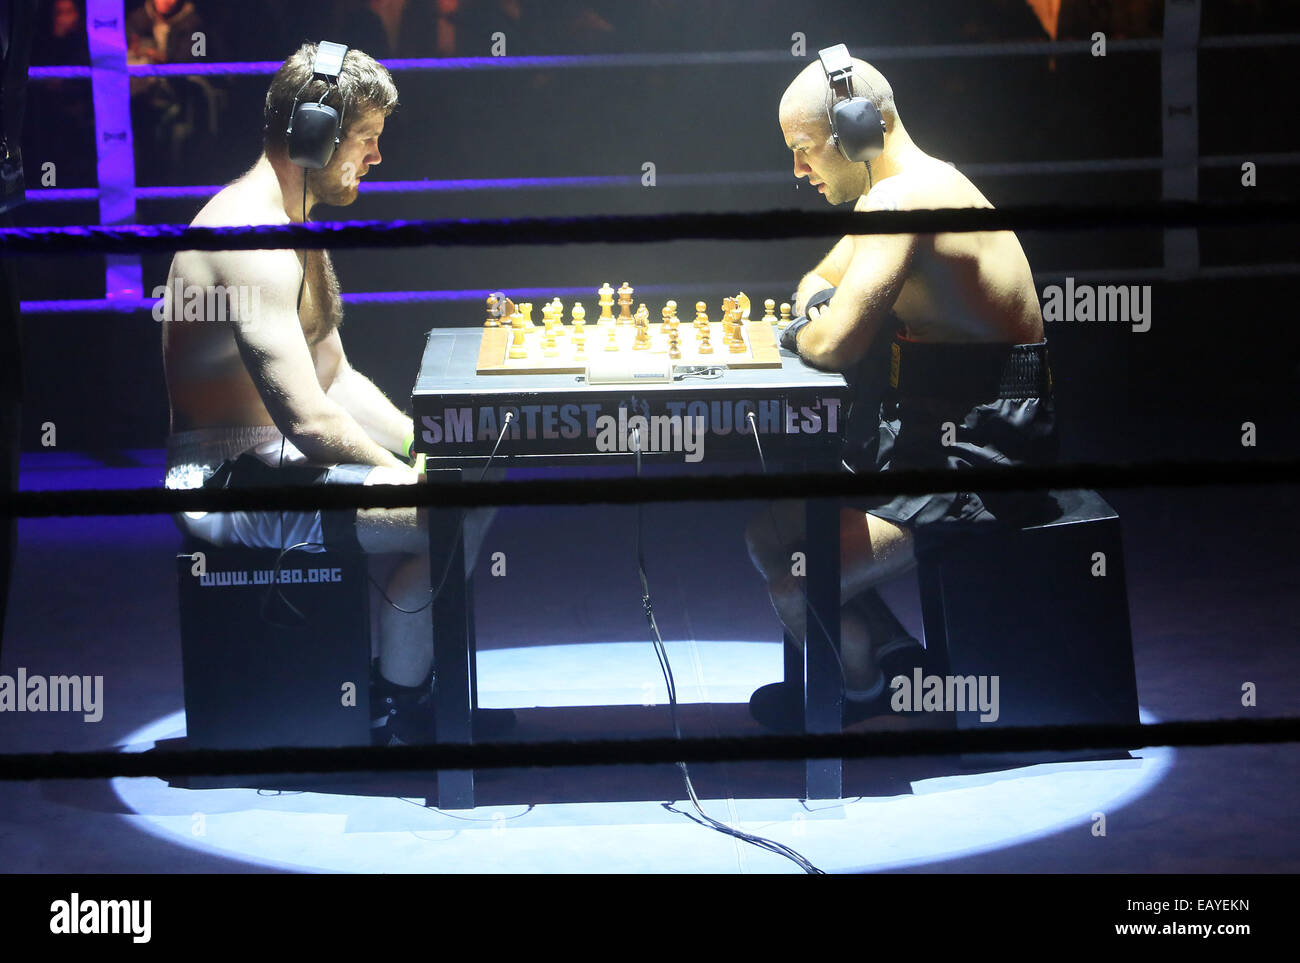 Current Middleweight Chessboxing World Champion Sven Editorial